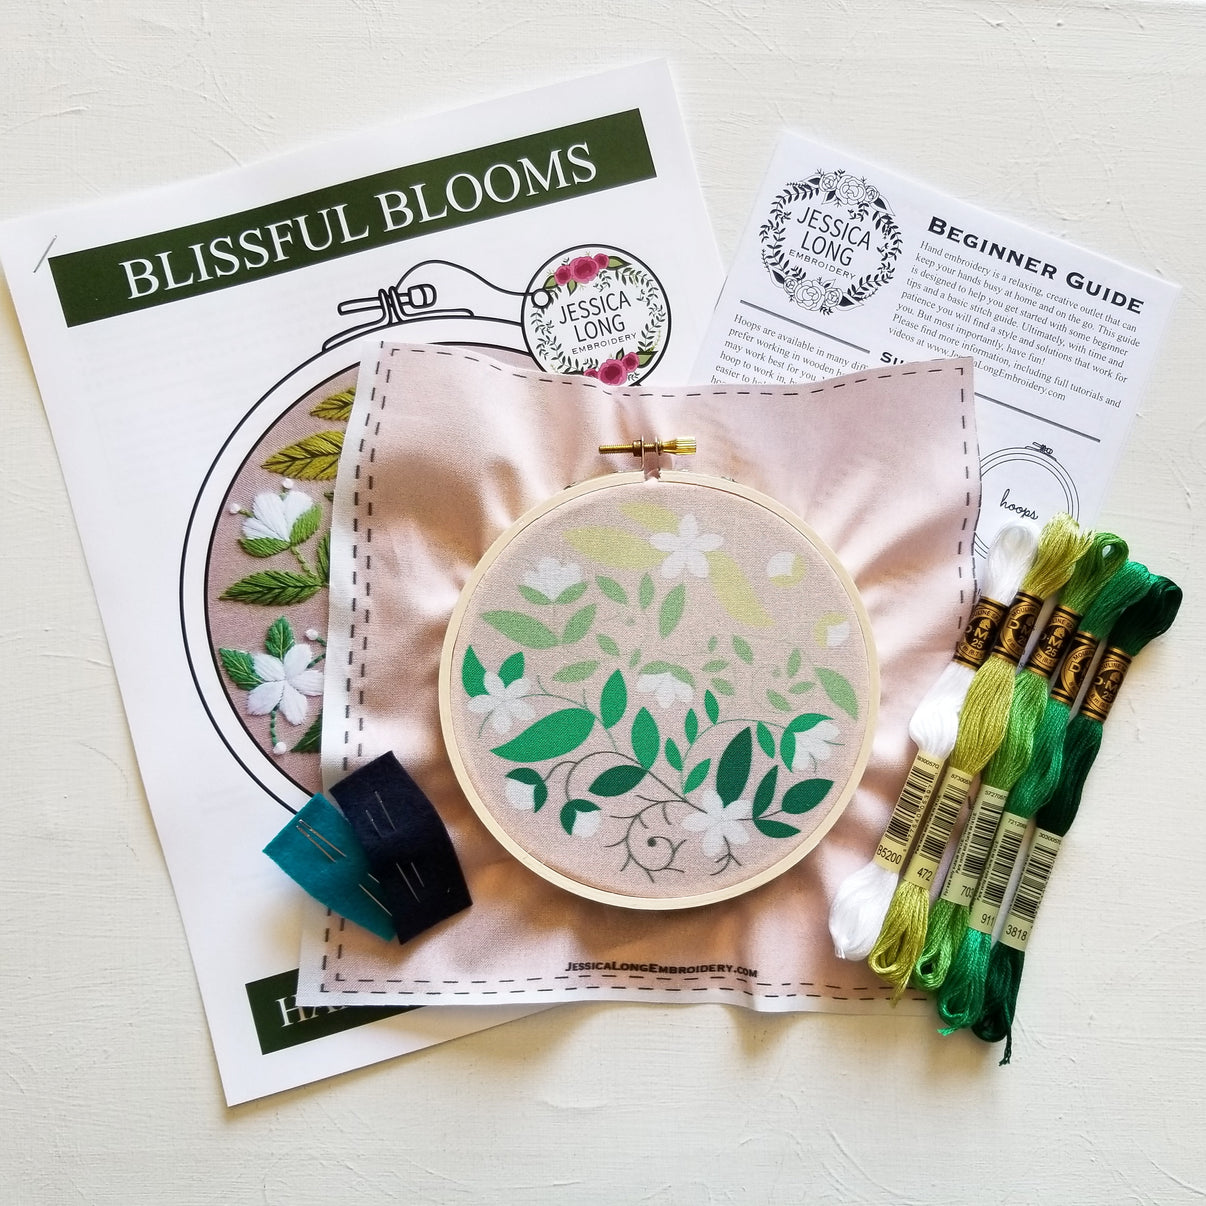 Blissful Blooms Beginner Embroidery Kit - Jessica Long